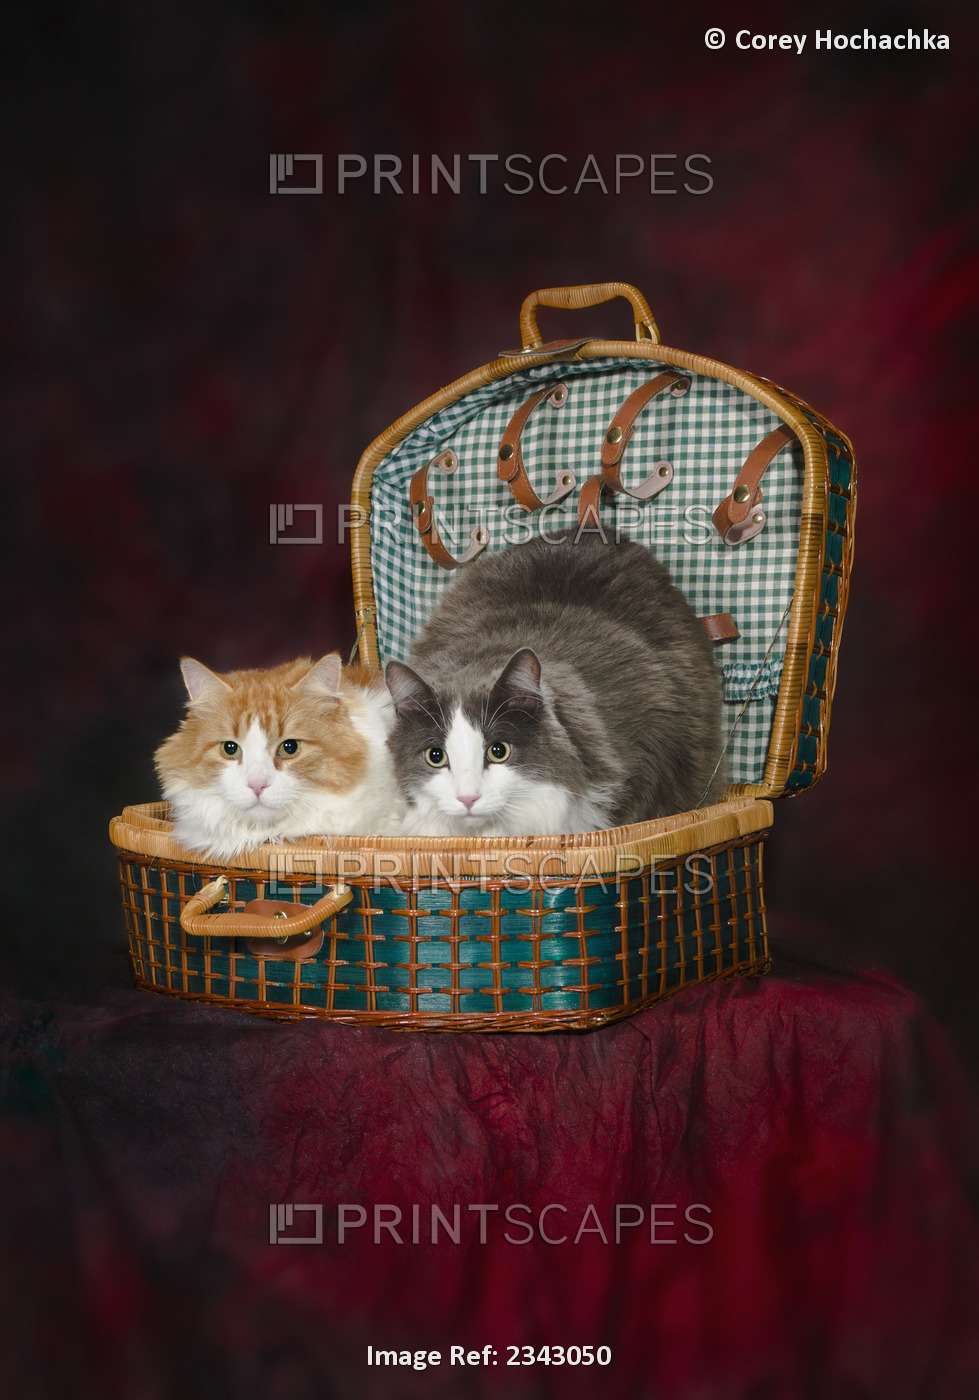 Portrait of two cats in a basket;St. albert alberta canada